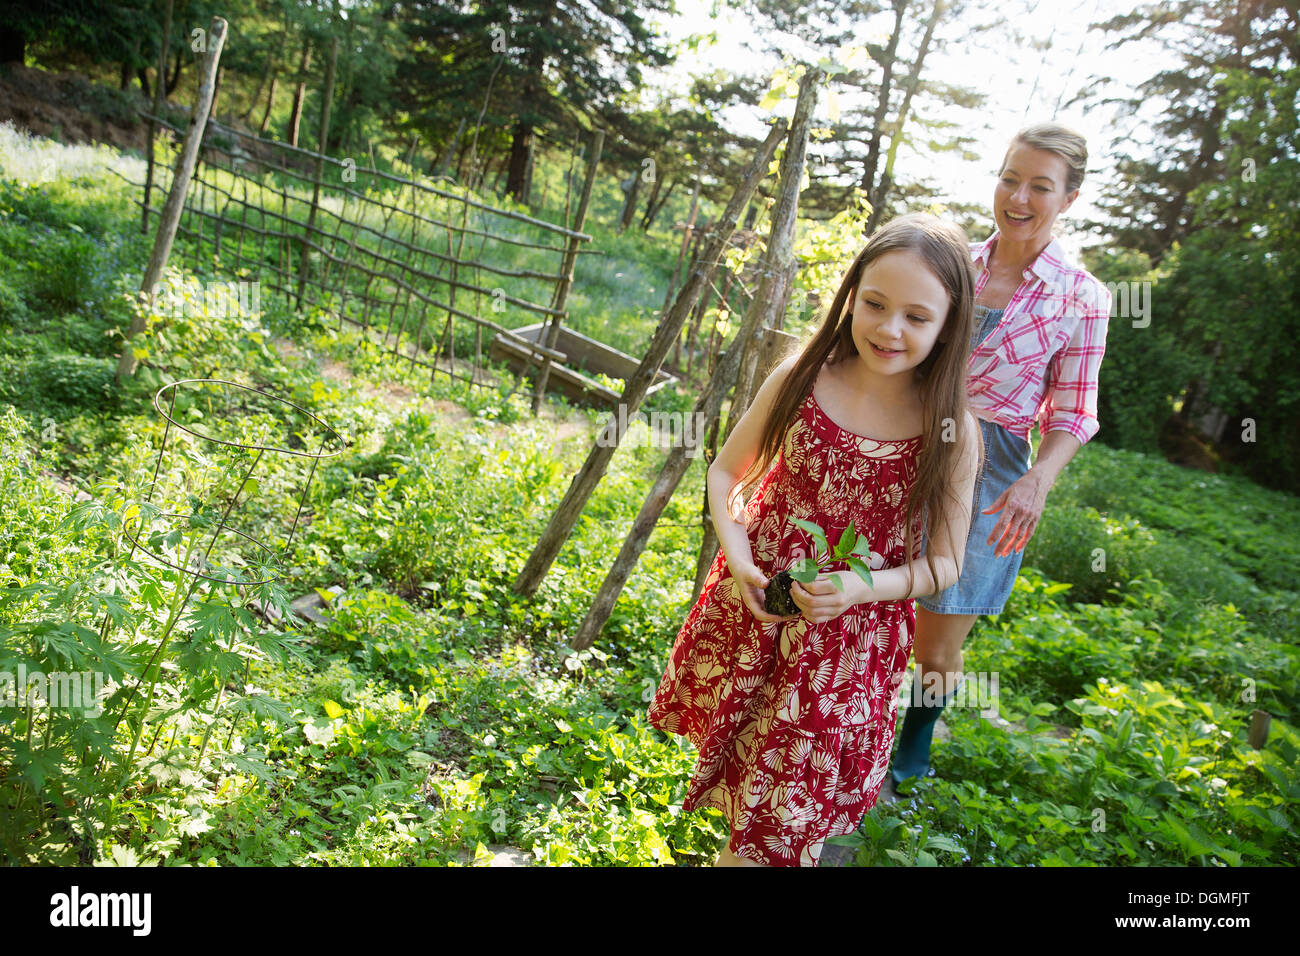 A young girl holding a seedling plant, and walking through the gardens of the farm with an adult woman following. Stock Photo